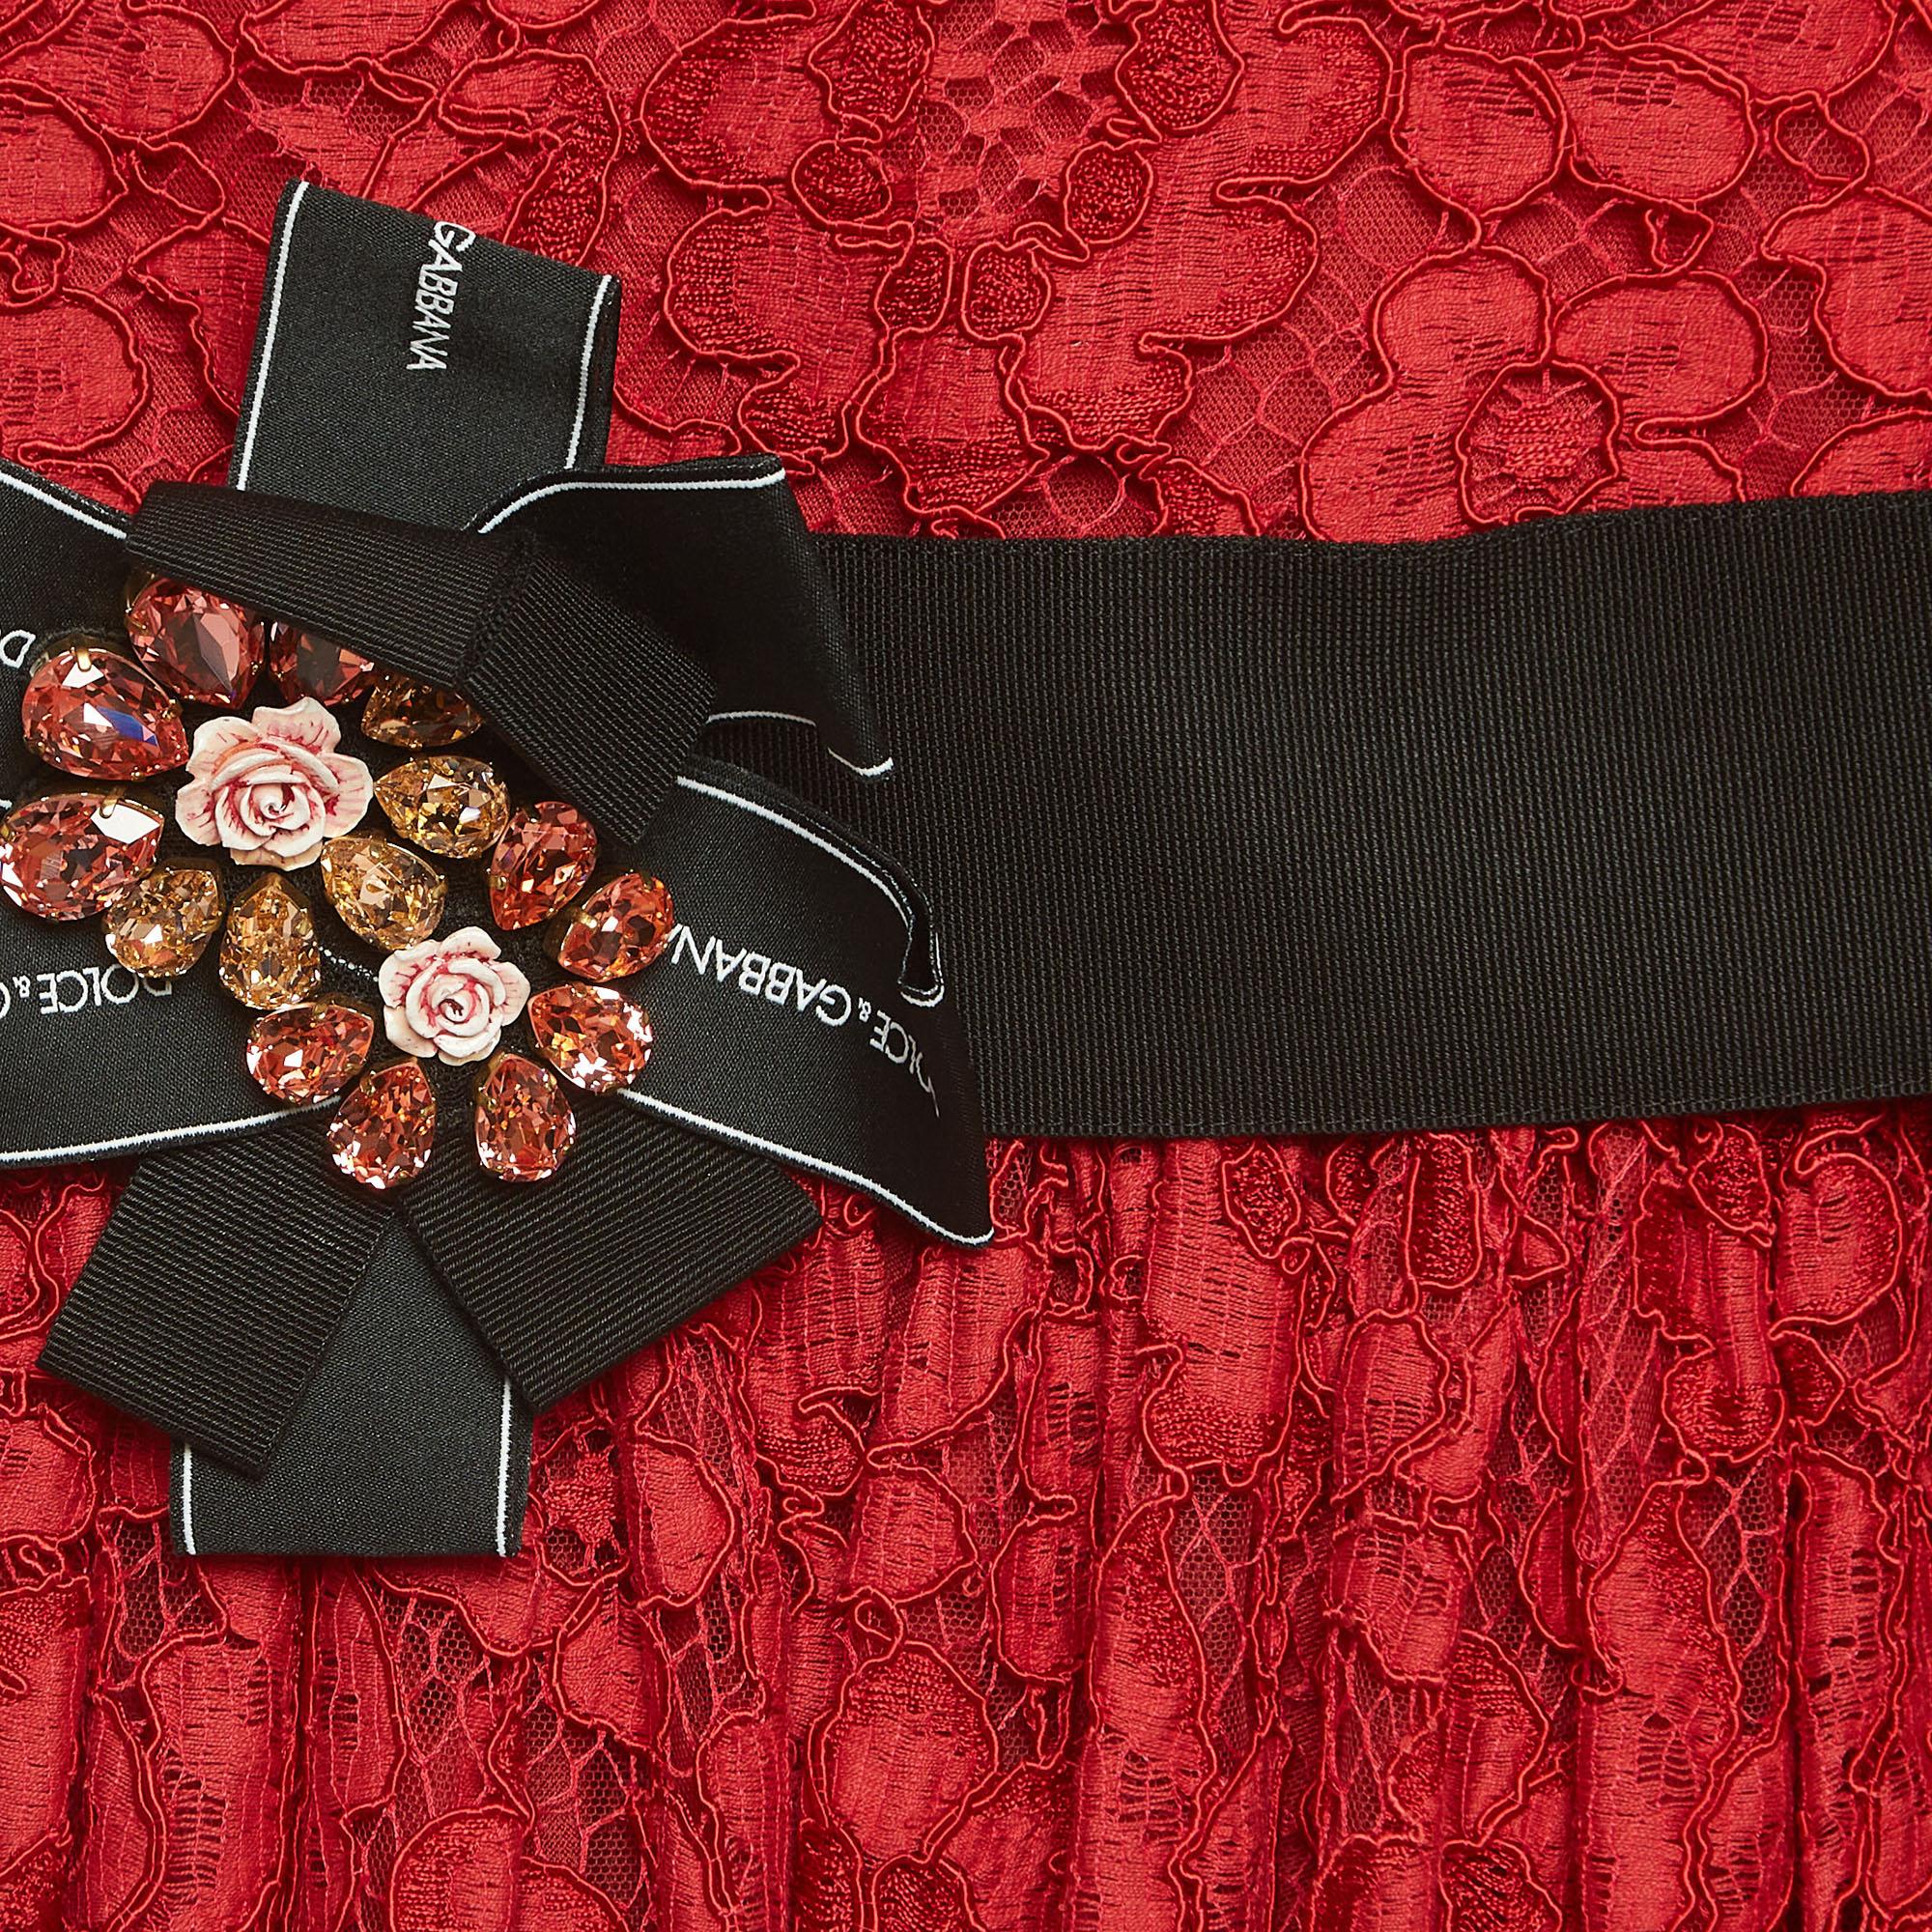 Dolce & Gabbana Red Lace Bow Detail Dress (6 Yrs) In Excellent Condition For Sale In Dubai, Al Qouz 2